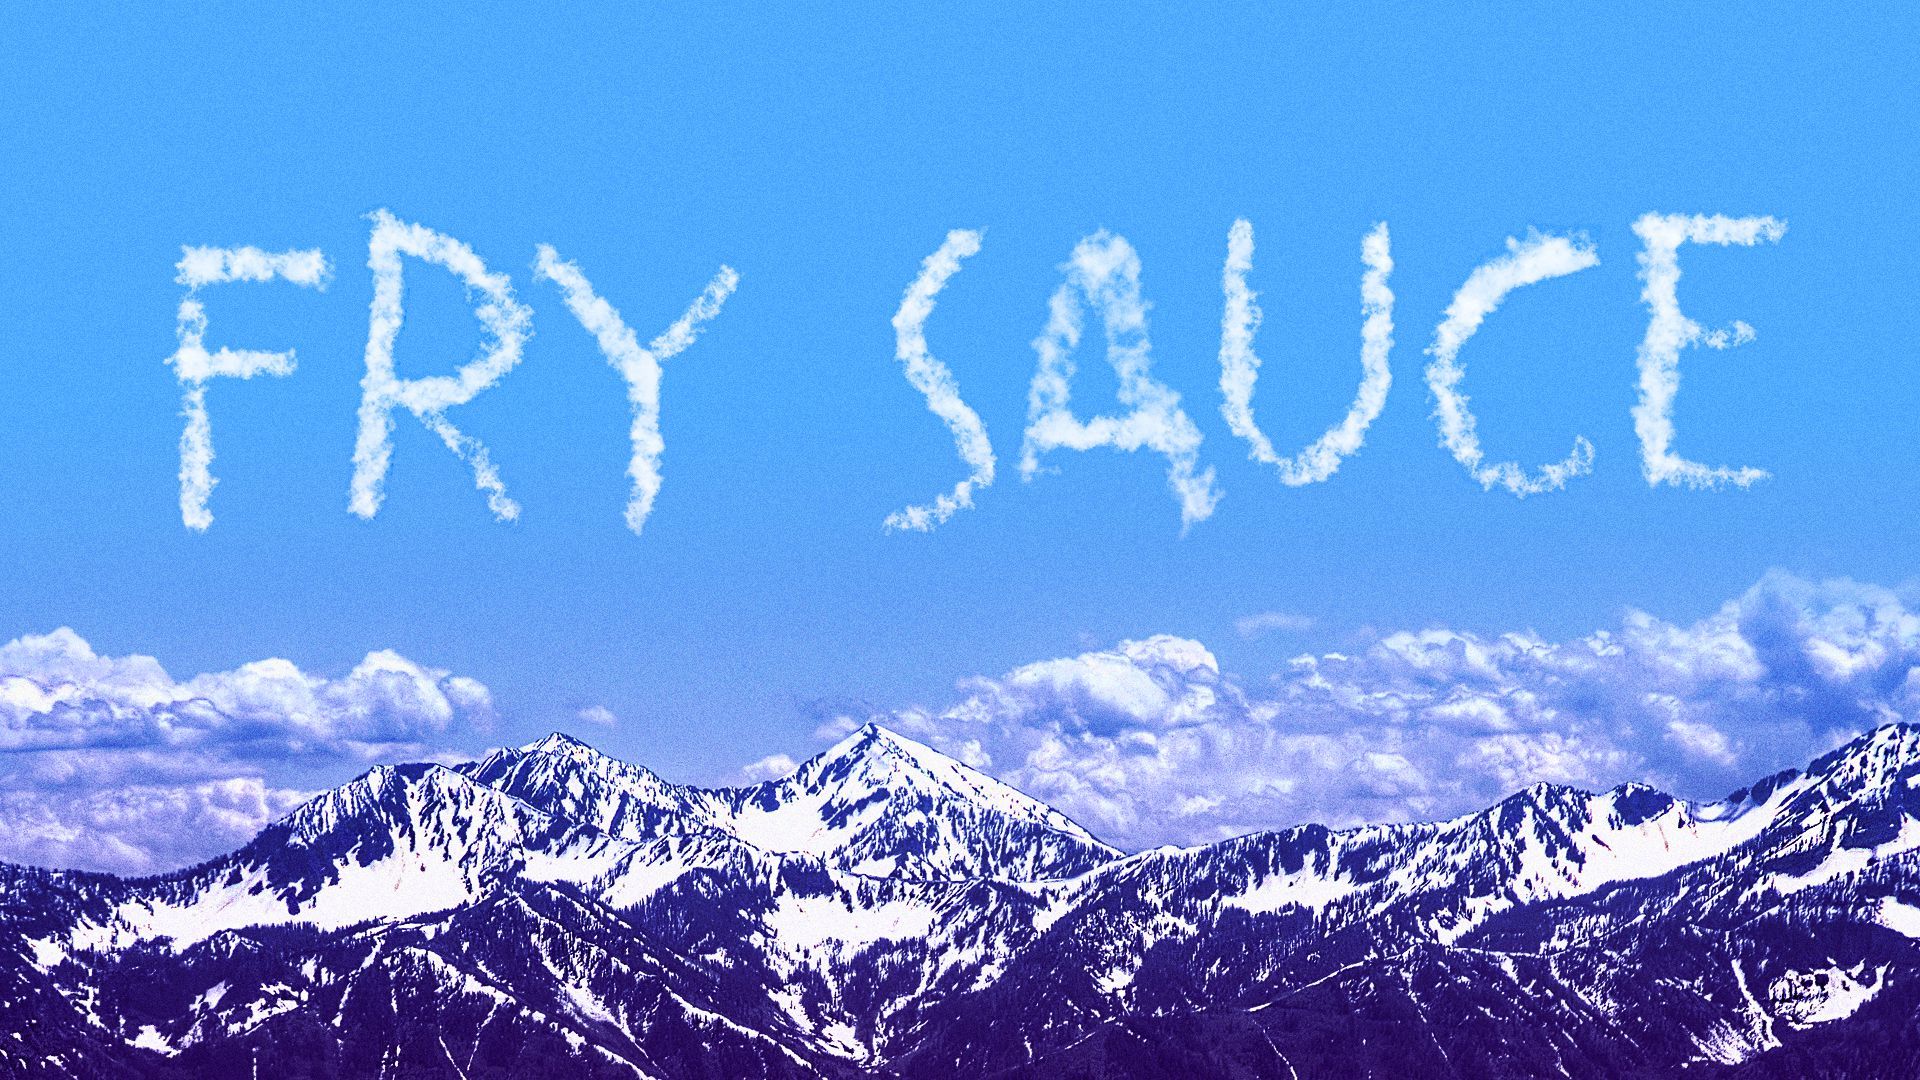 Illustration of "Fry Sauce" written in the clouds above mountains. 